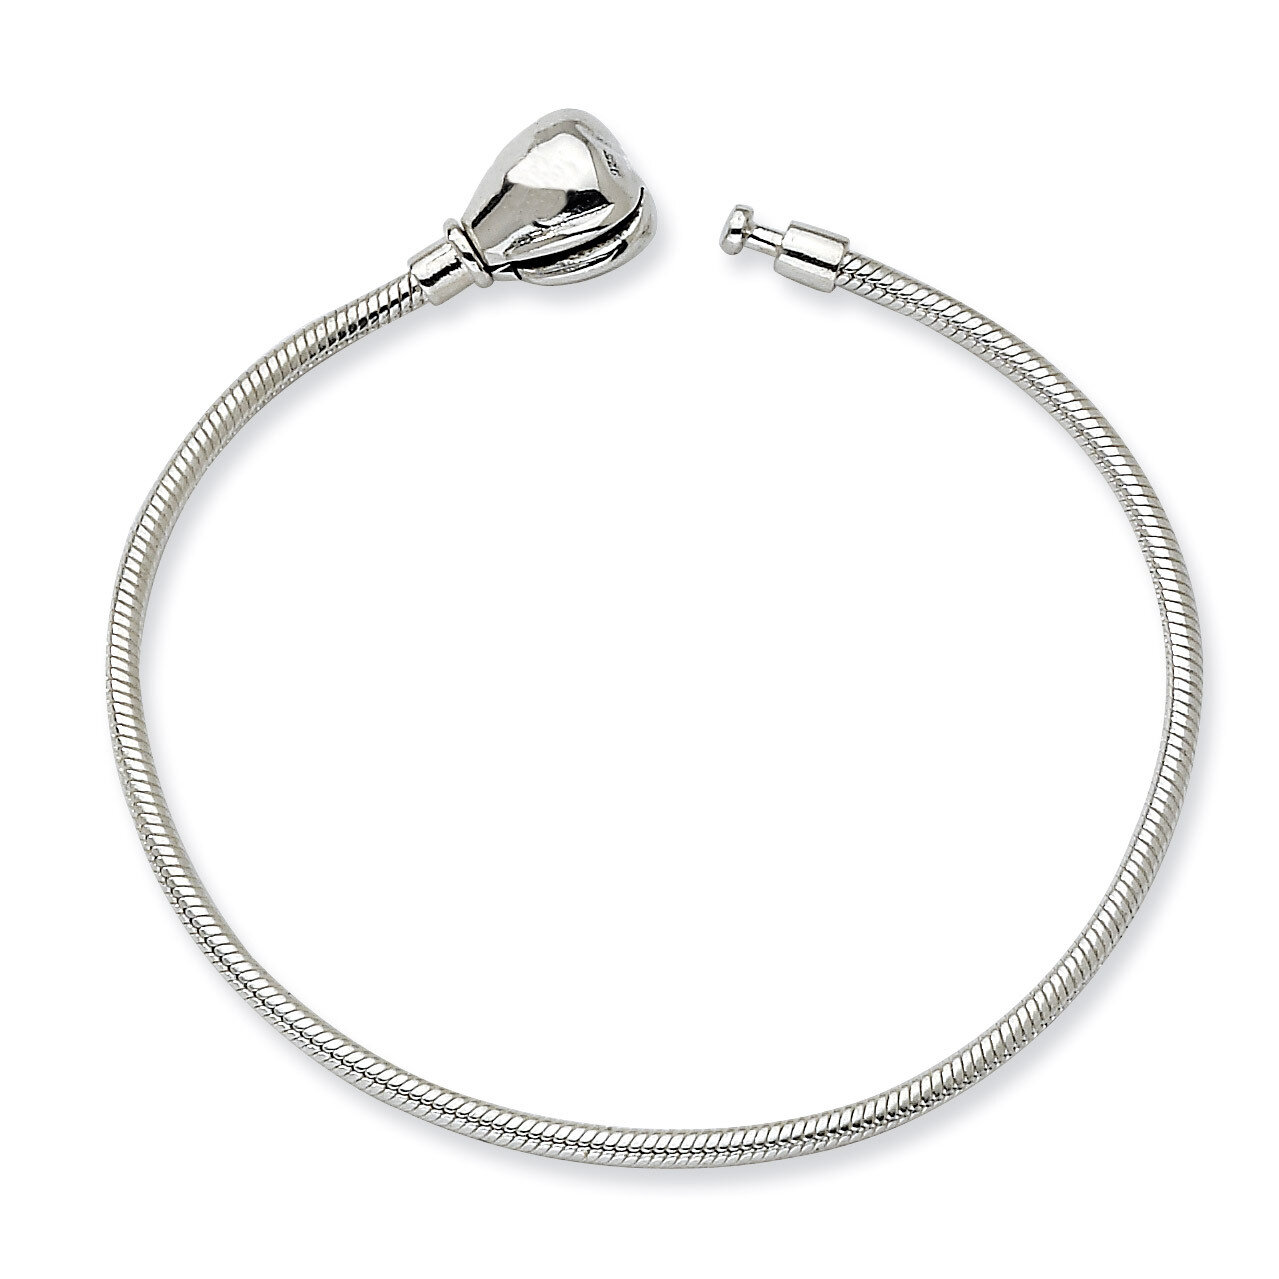 5 Inch 13cm Hinged Clasp Bead Bracelet - Sterling Silver QRS988-5